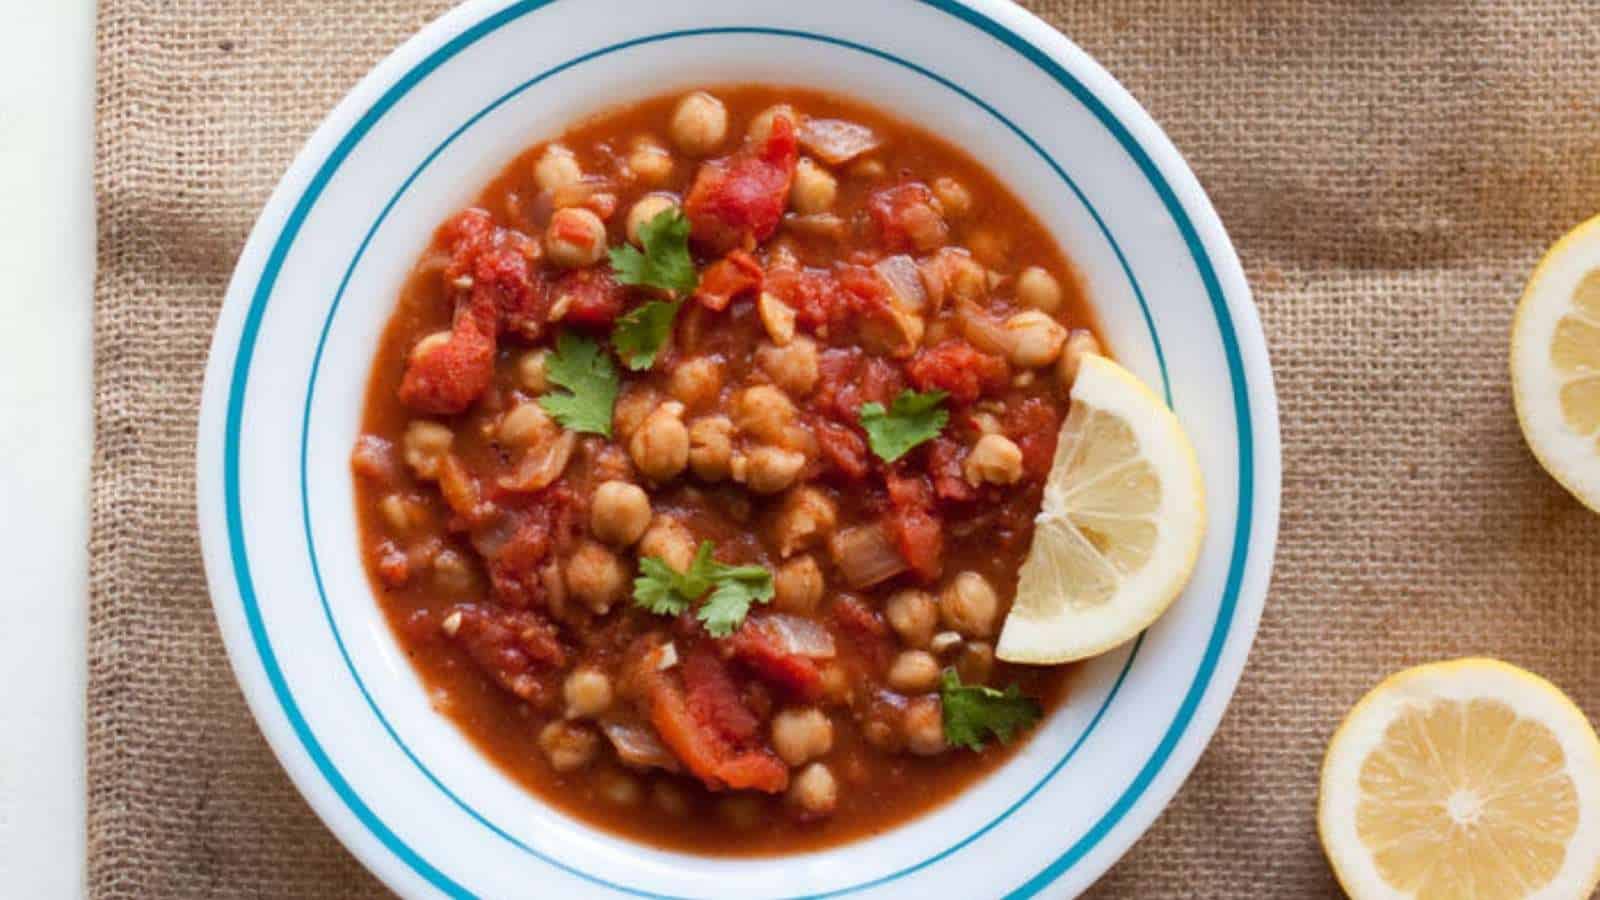 A bowl of tomato and chickpea stew with lemon wedges.